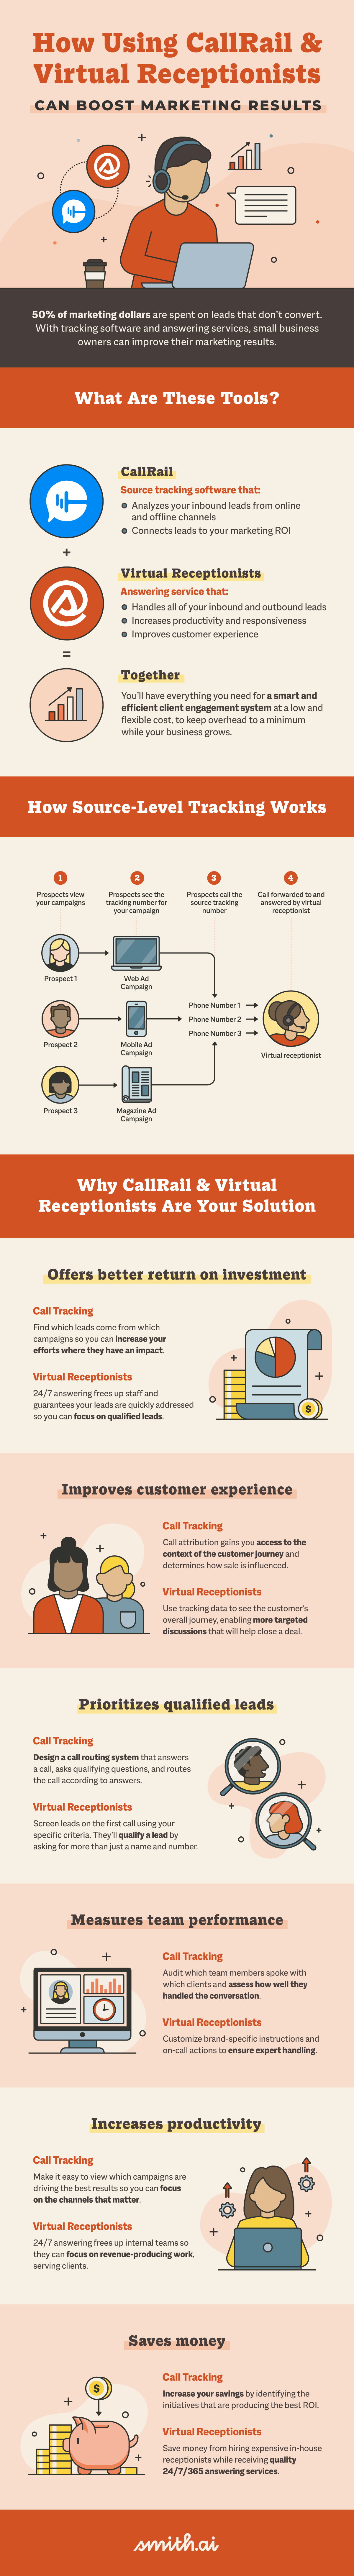 How using CallRail & a virtual receptionist can boost marketing results